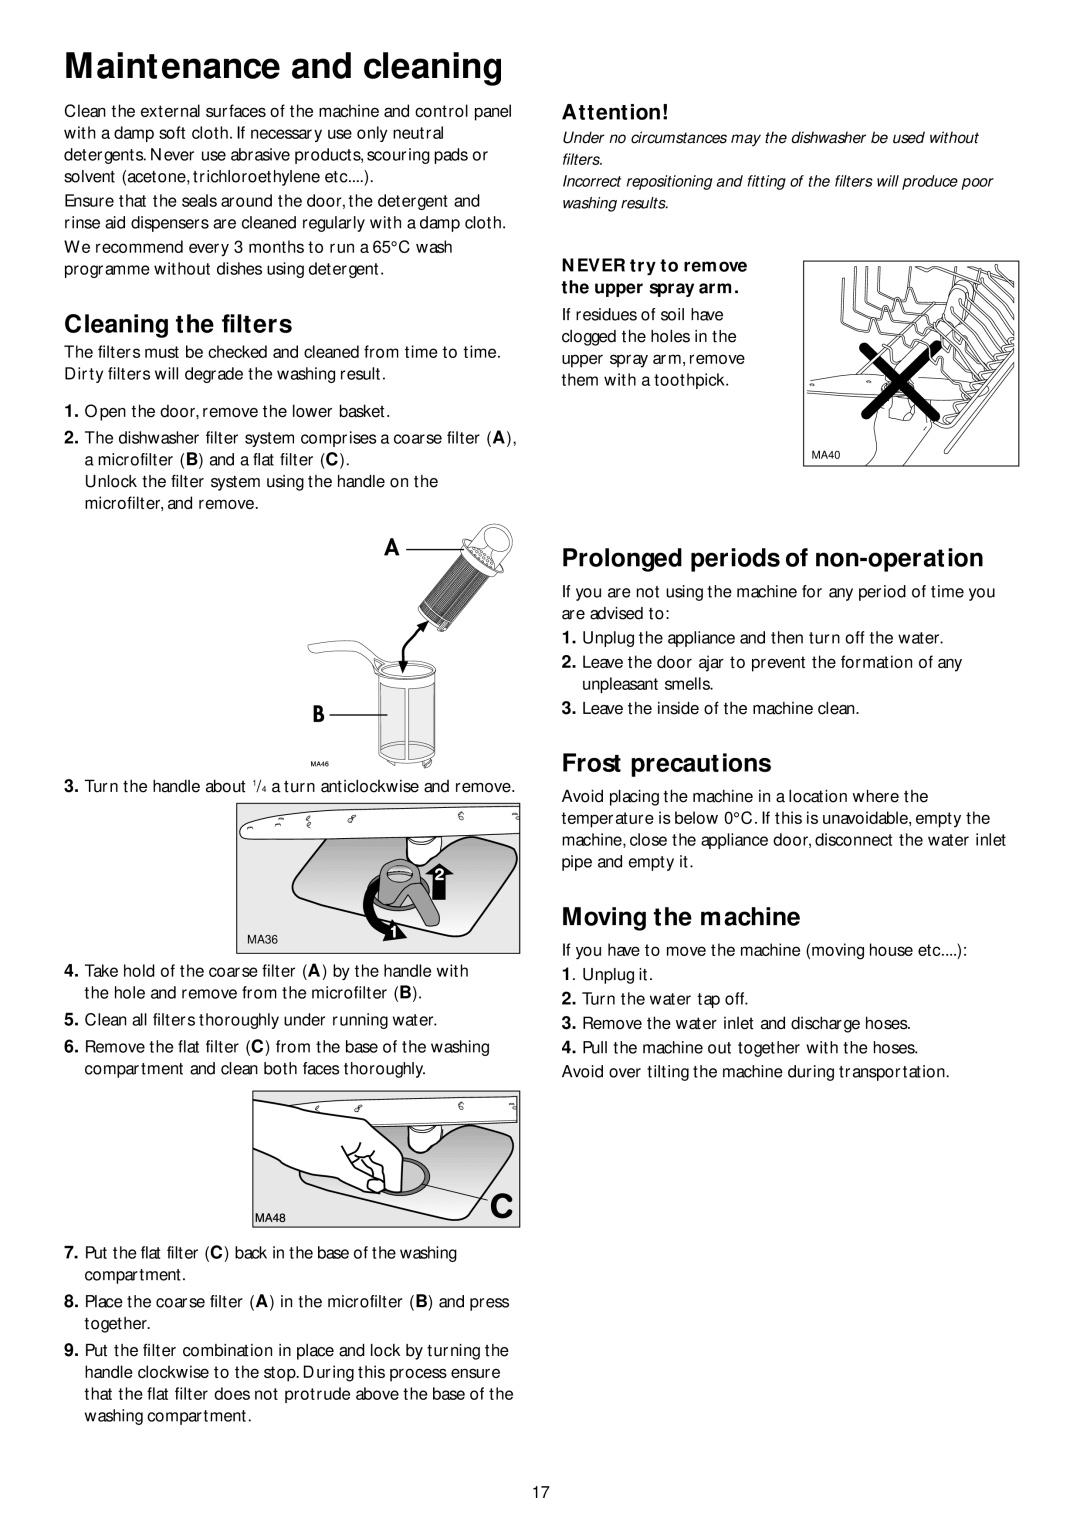 John Lewis JLDWW 1201 instruction manual Maintenance and cleaning, Cleaning the filters, Prolonged periods of non-operation 